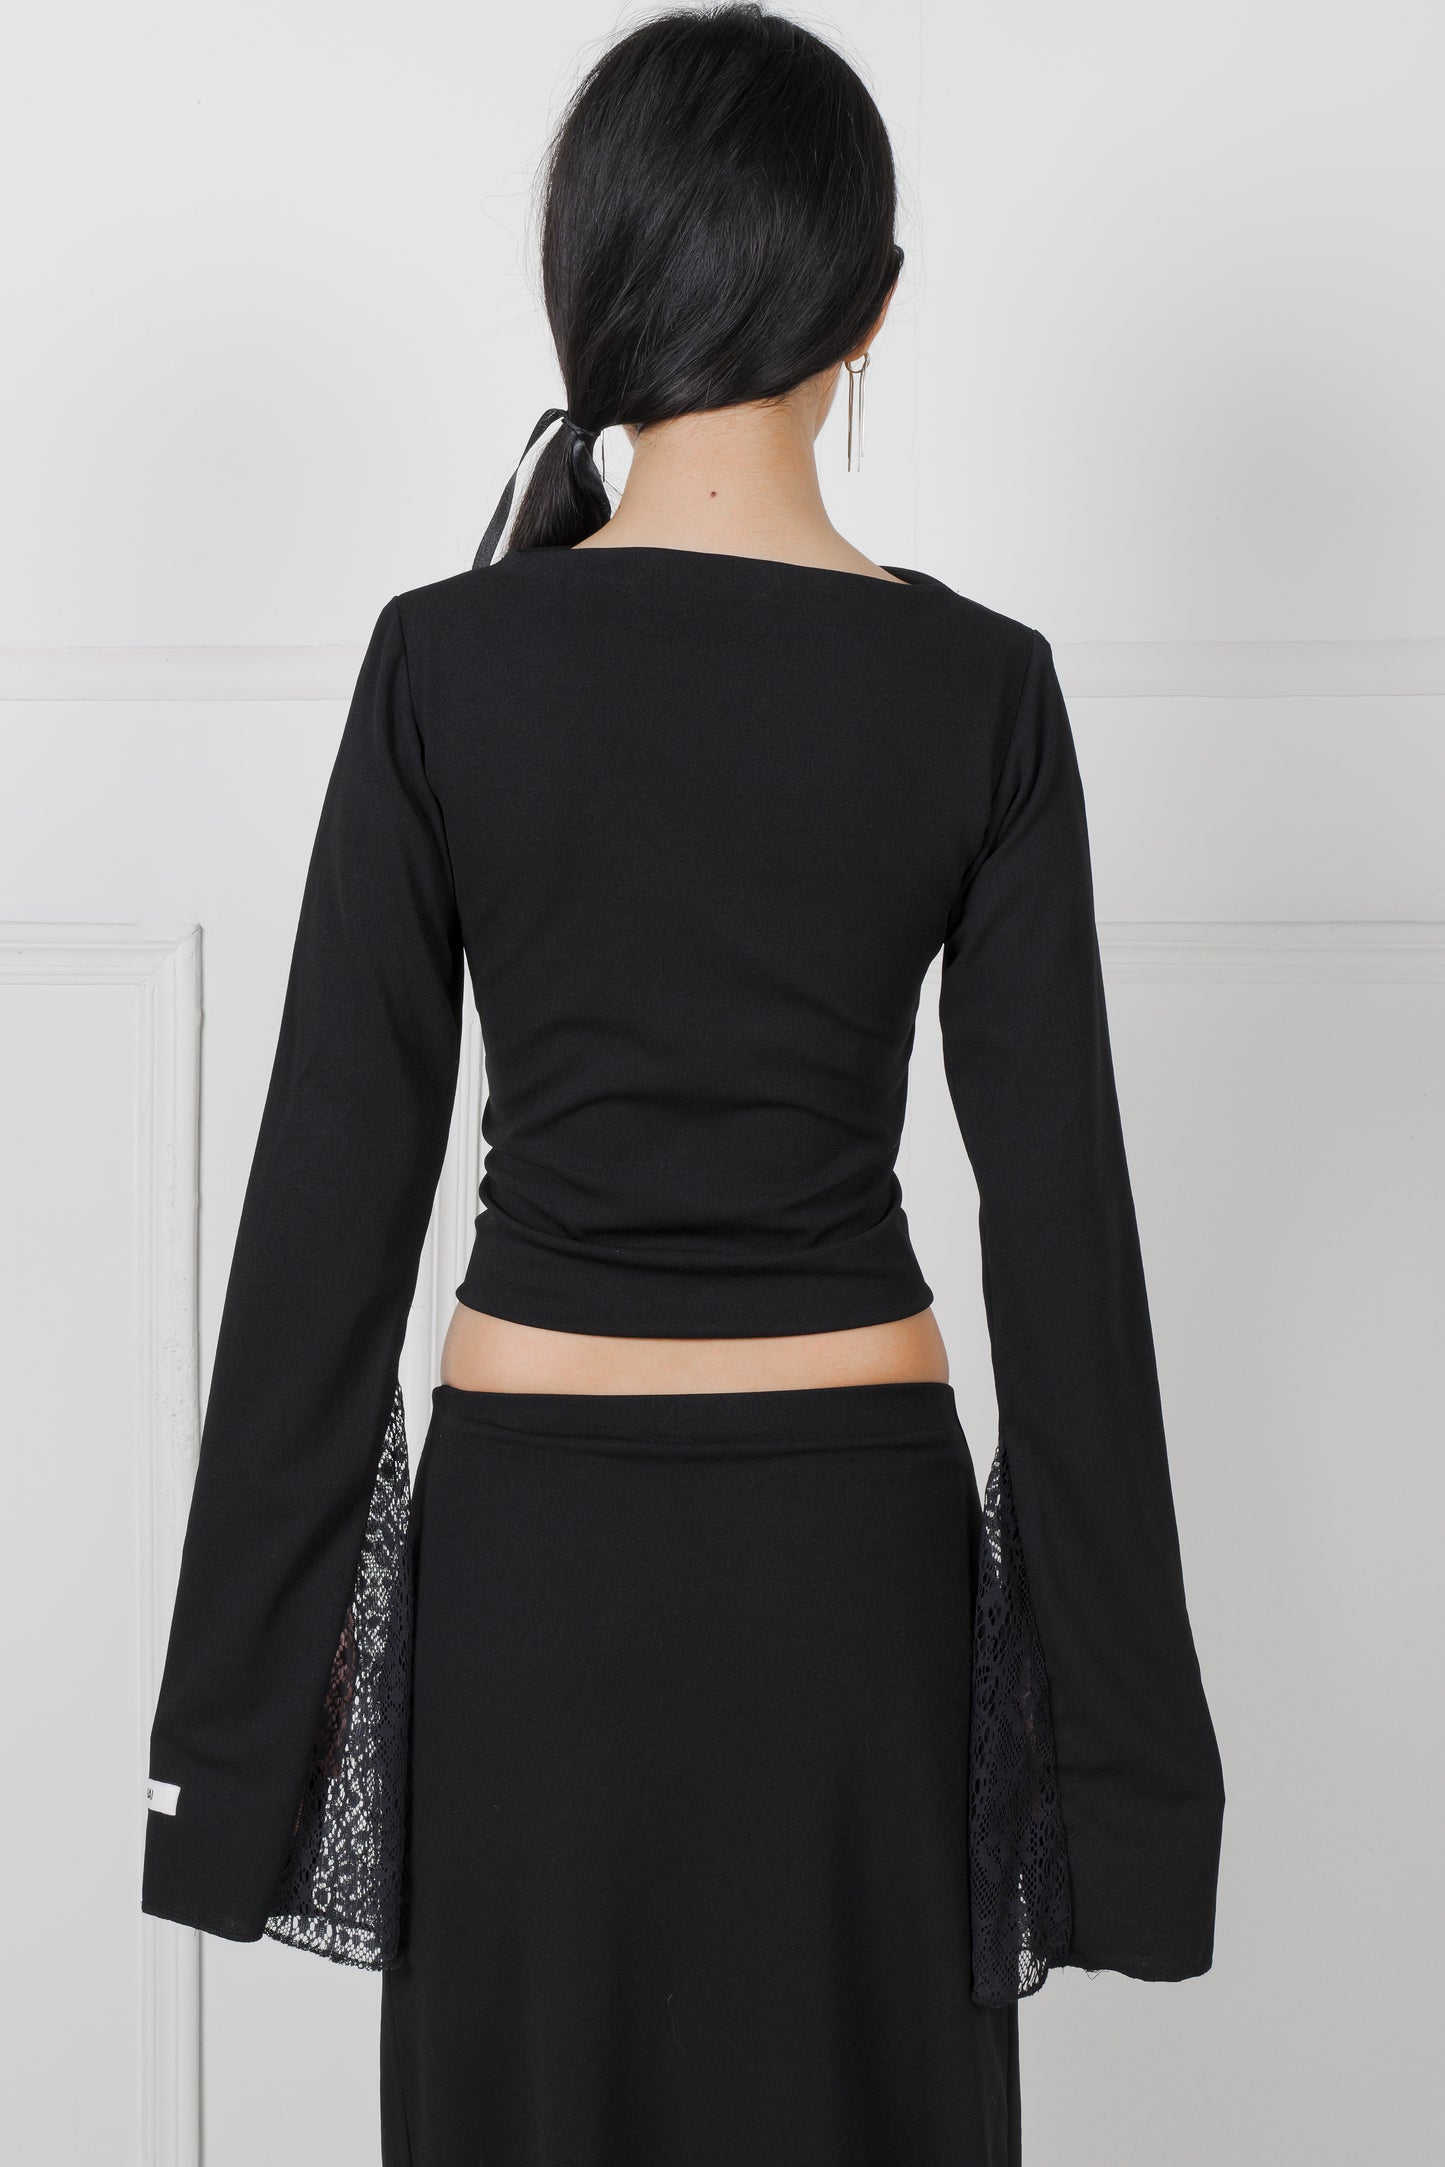 Top with Bell Sleeve Details